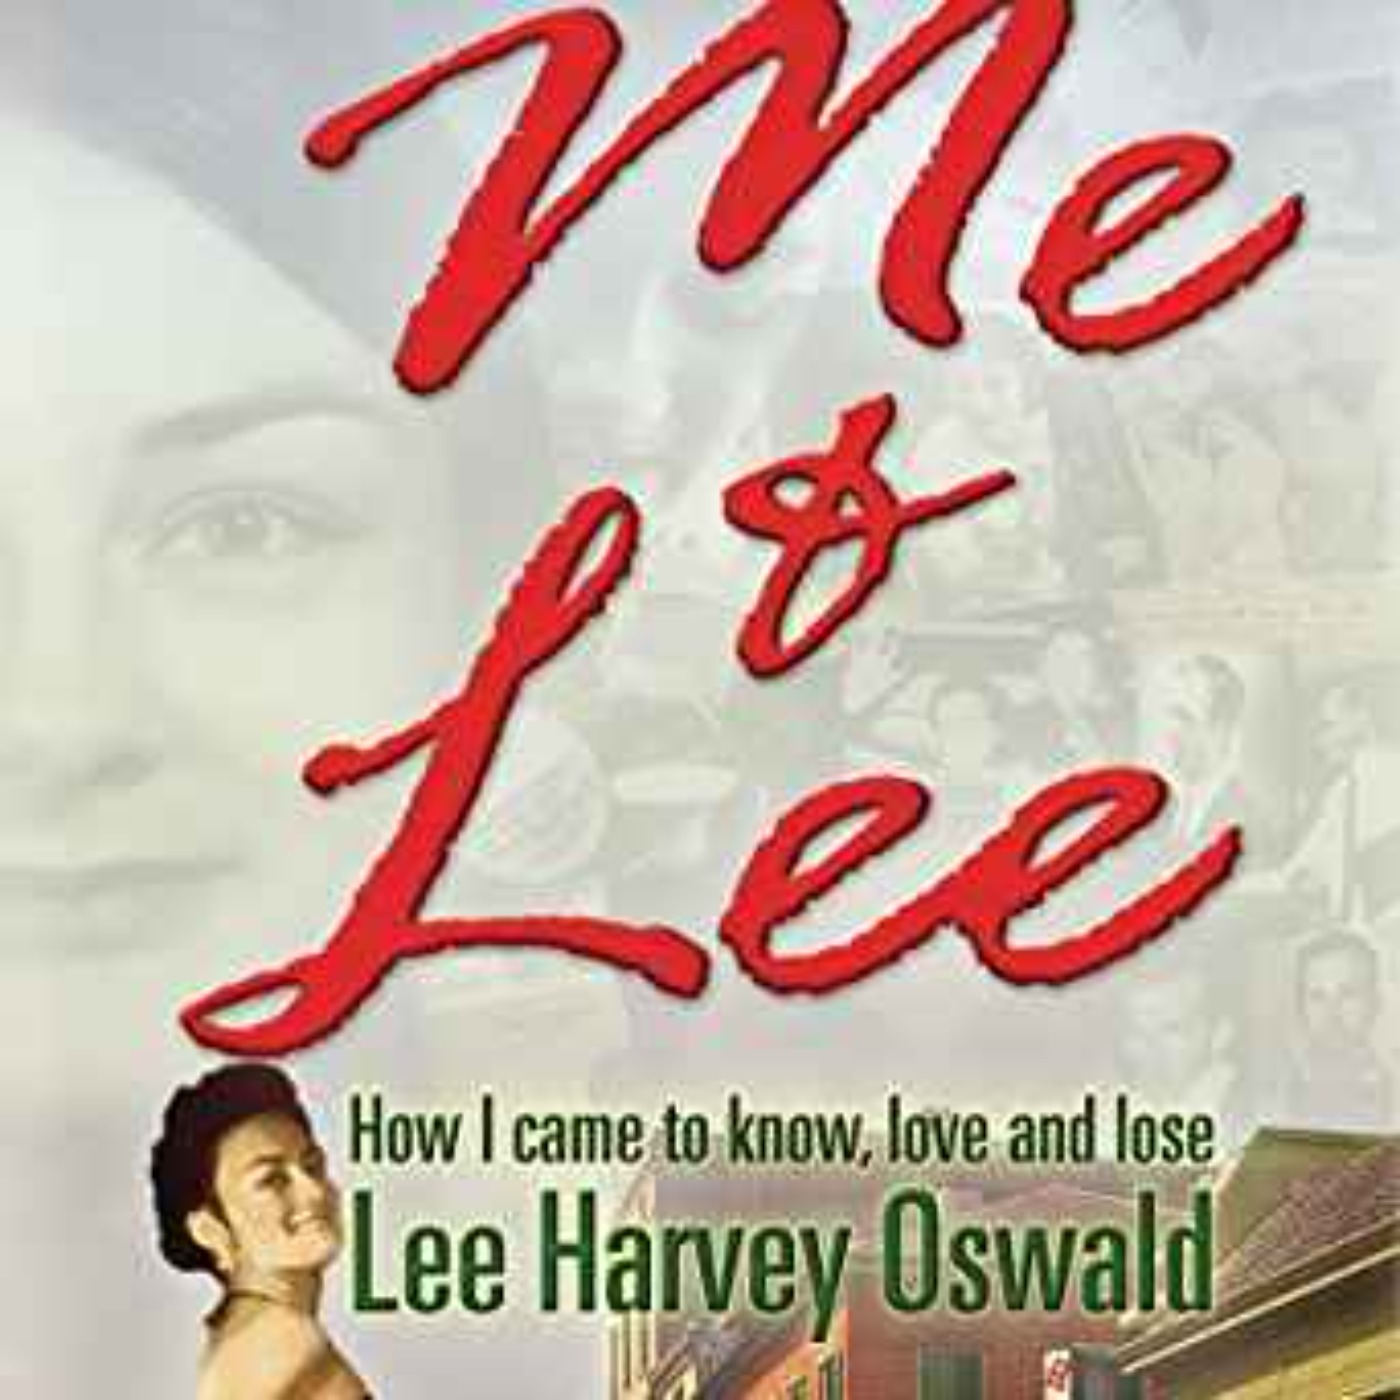 Judyth Vary Baker - Me & Lee: How I Came to Know, Love and Lose Lee Harvey Oswald